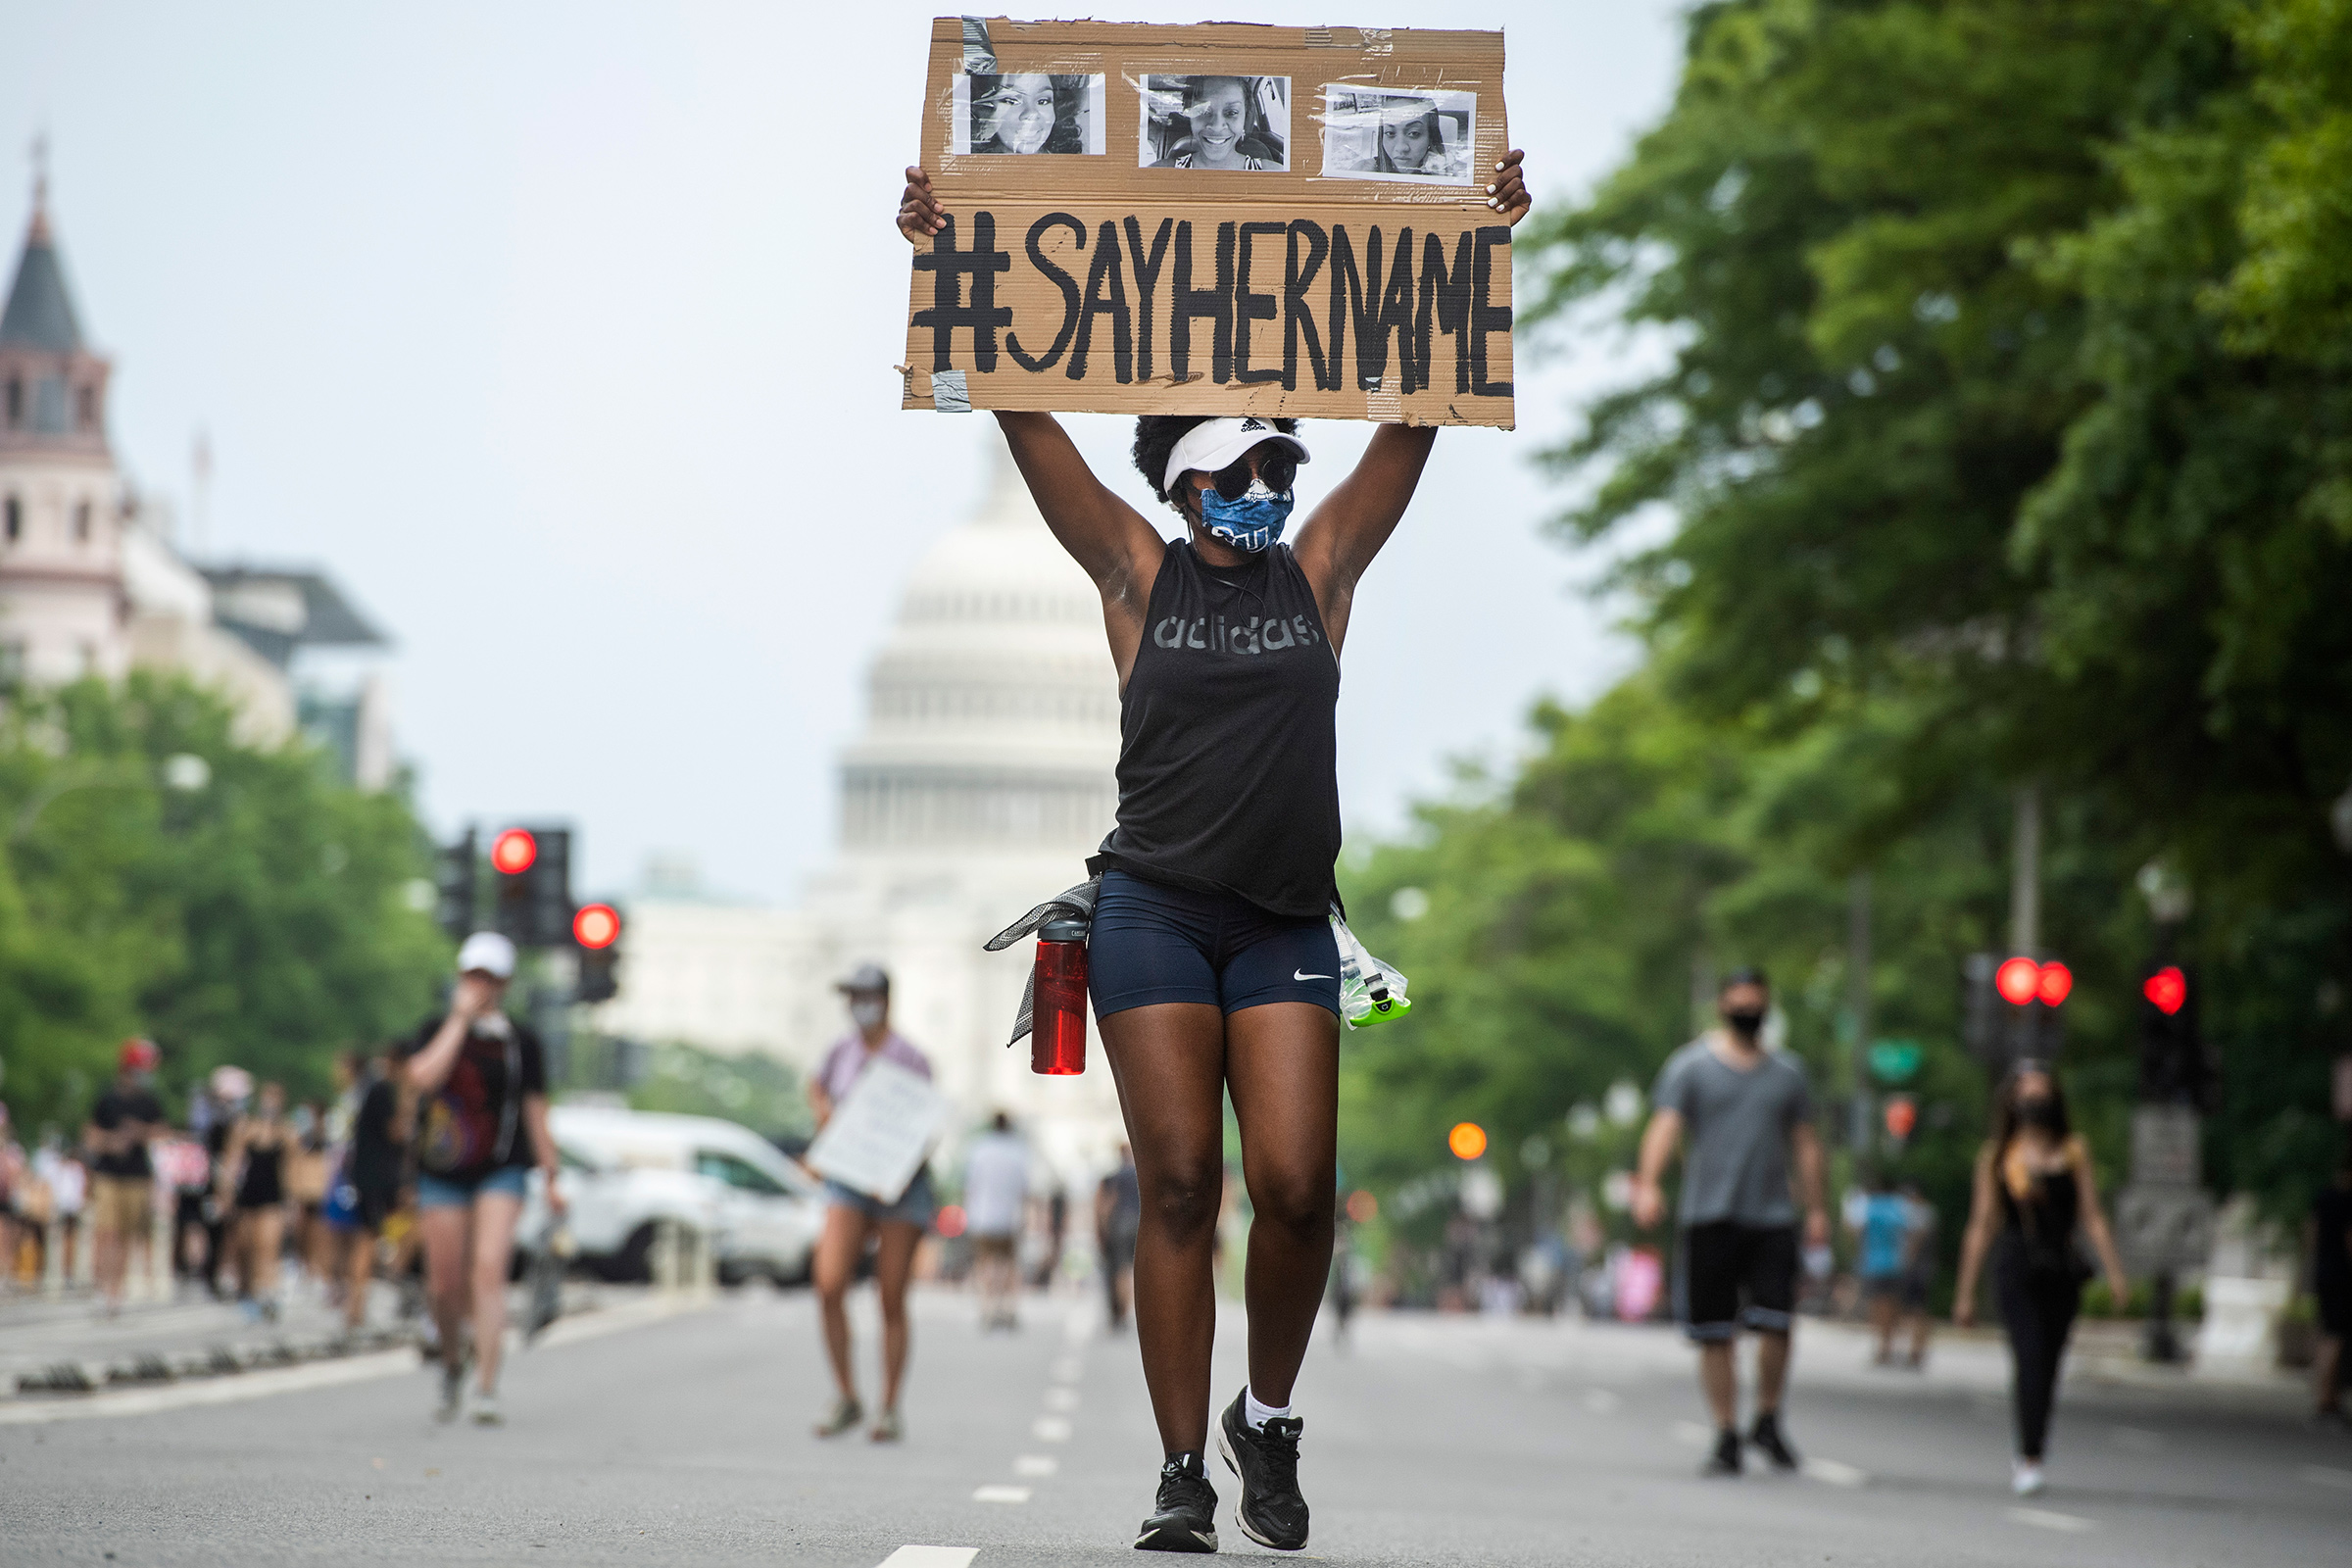 A demonstrator marches on Pennsylvania Avenue in Washington, D.C., on June 6, 2020. (Tom Williams—CQ-Roll Call, Inc./Getty Images)